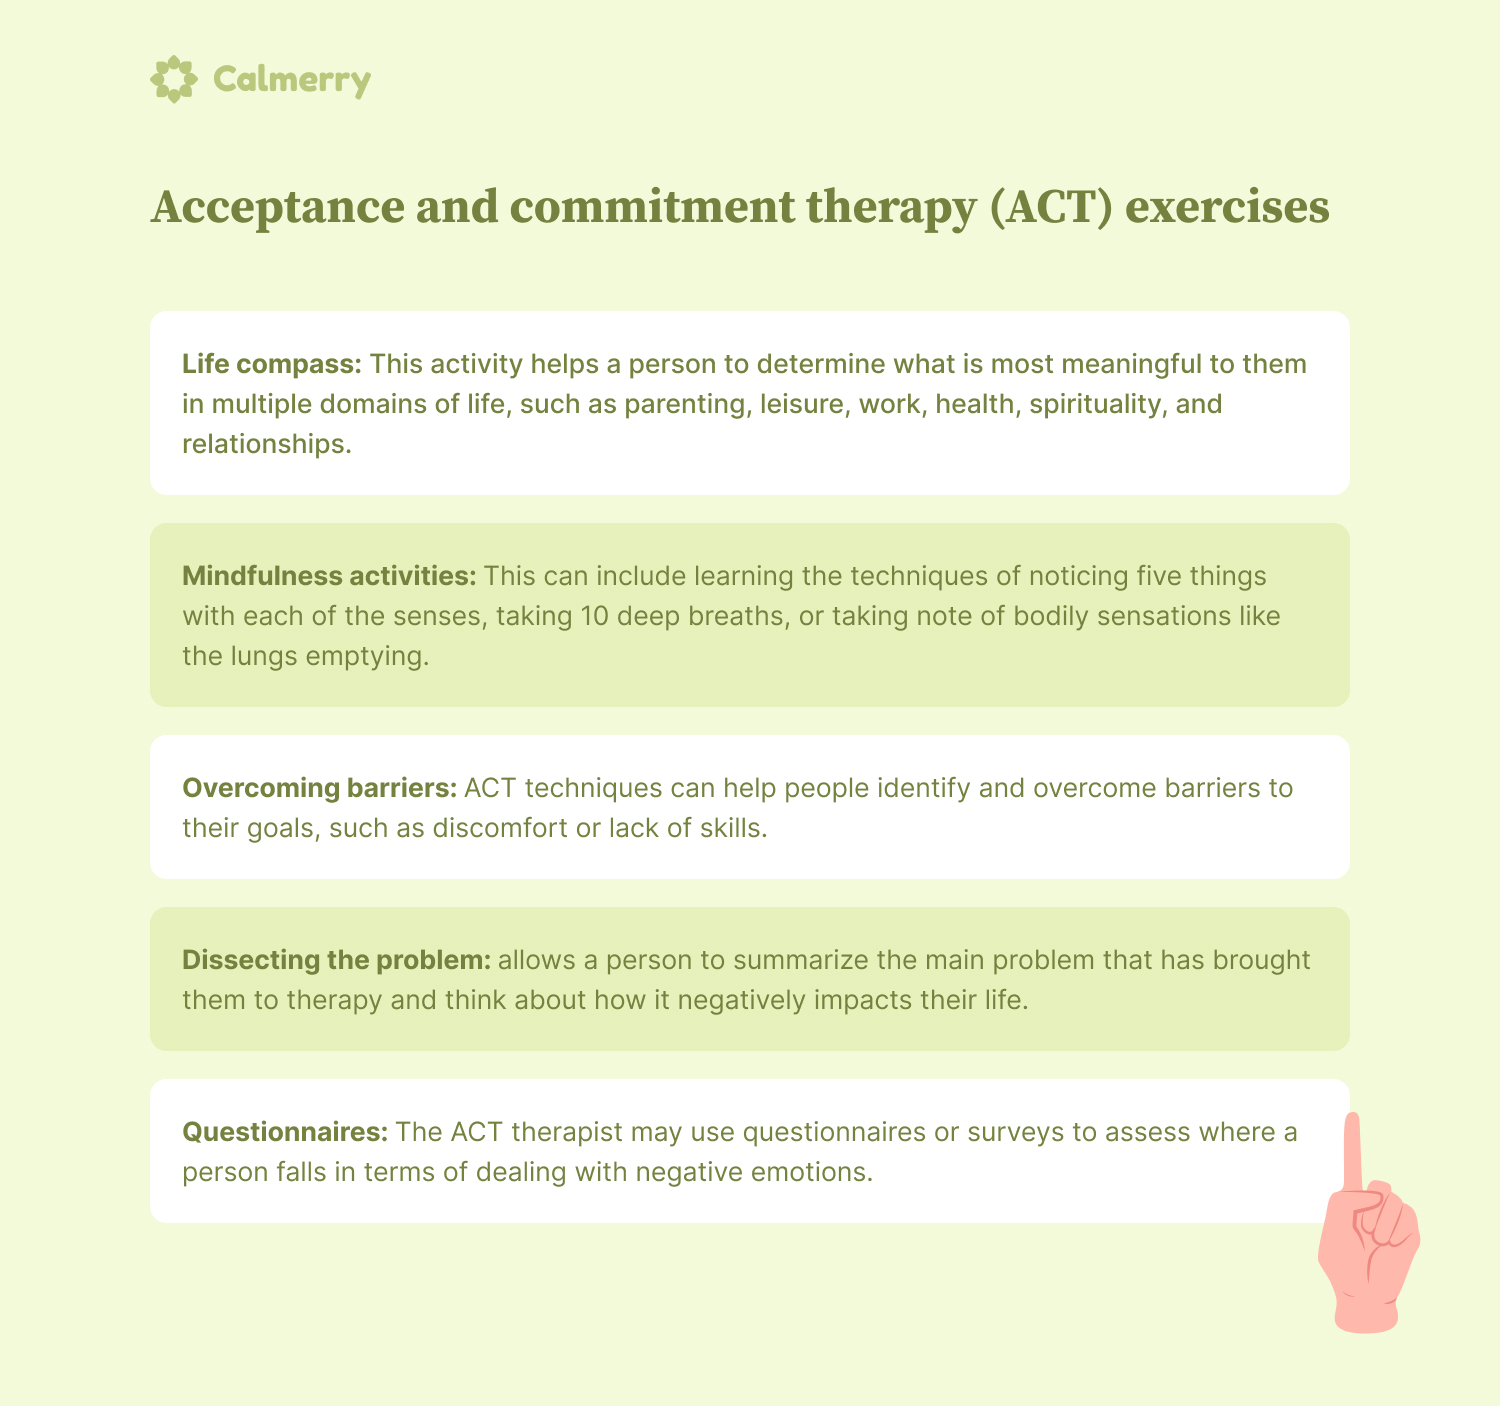 Acceptance-and-commitment-therapy-exercises Life compass: This activity helps a person to determine what is most meaningful to them in multiple domains of life, such as parenting, leisure, work, health, spirituality, and relationships. Mindfulness activities: This can include learning the techniques of noticing five things with each of the senses, taking 10 deep breaths, or taking note of bodily sensations like the lungs emptying. Overcoming barriers: ACT techniques can help people identify and overcome barriers to their goals, such as discomfort or lack of skills. Dissecting the problem: allows a person to summarize the main problem that has brought them to therapy and think about how it negatively impacts their life. Questionnaires: The ACT therapist may use questionnaires or surveys to assess where a person falls in terms of dealing with negative emotions.